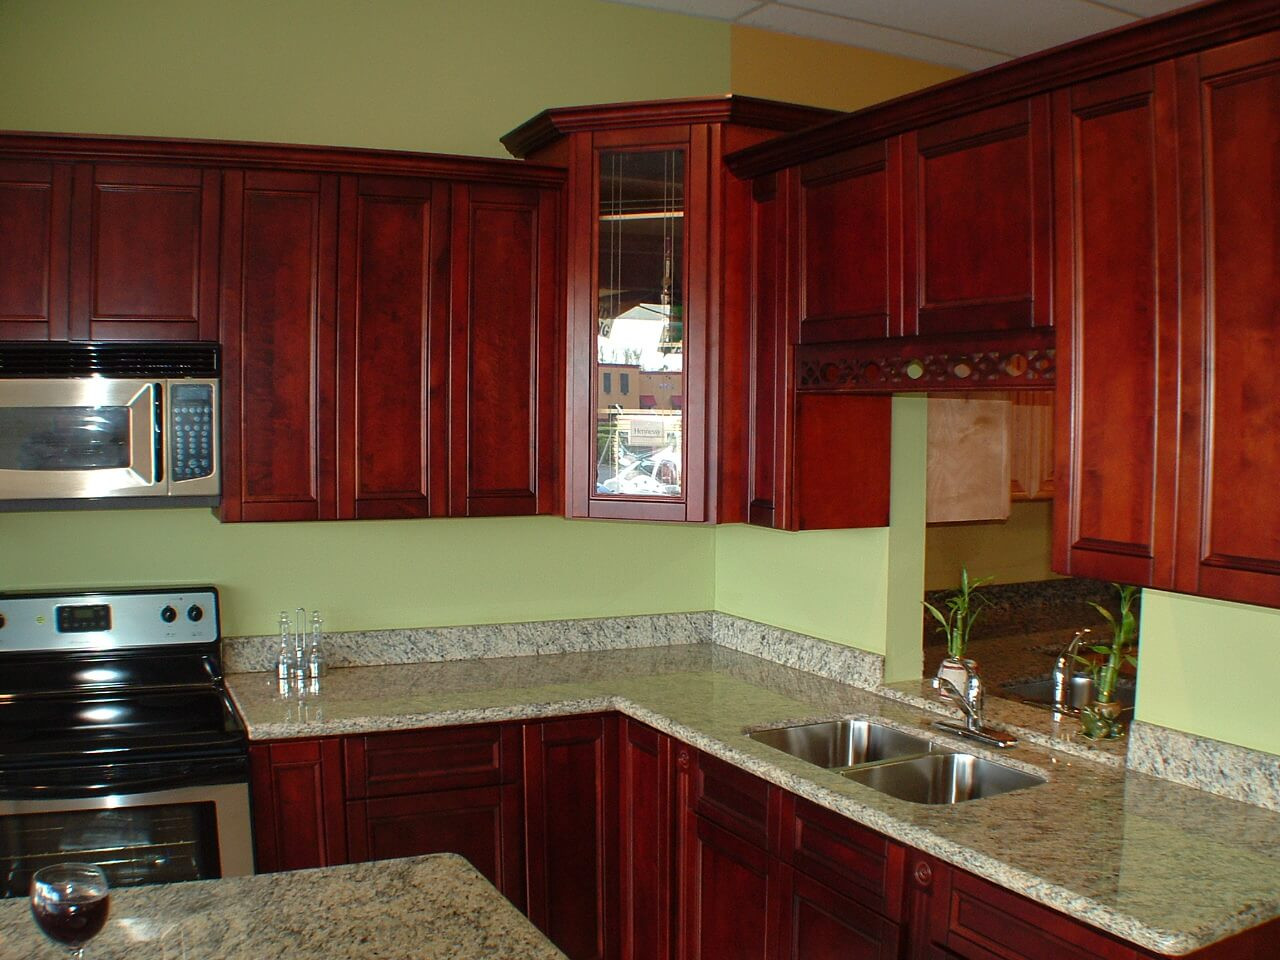 Kitchen Cabinet Sales
 Used Kitchen Cabinets for Sale by Owner TheyDesign